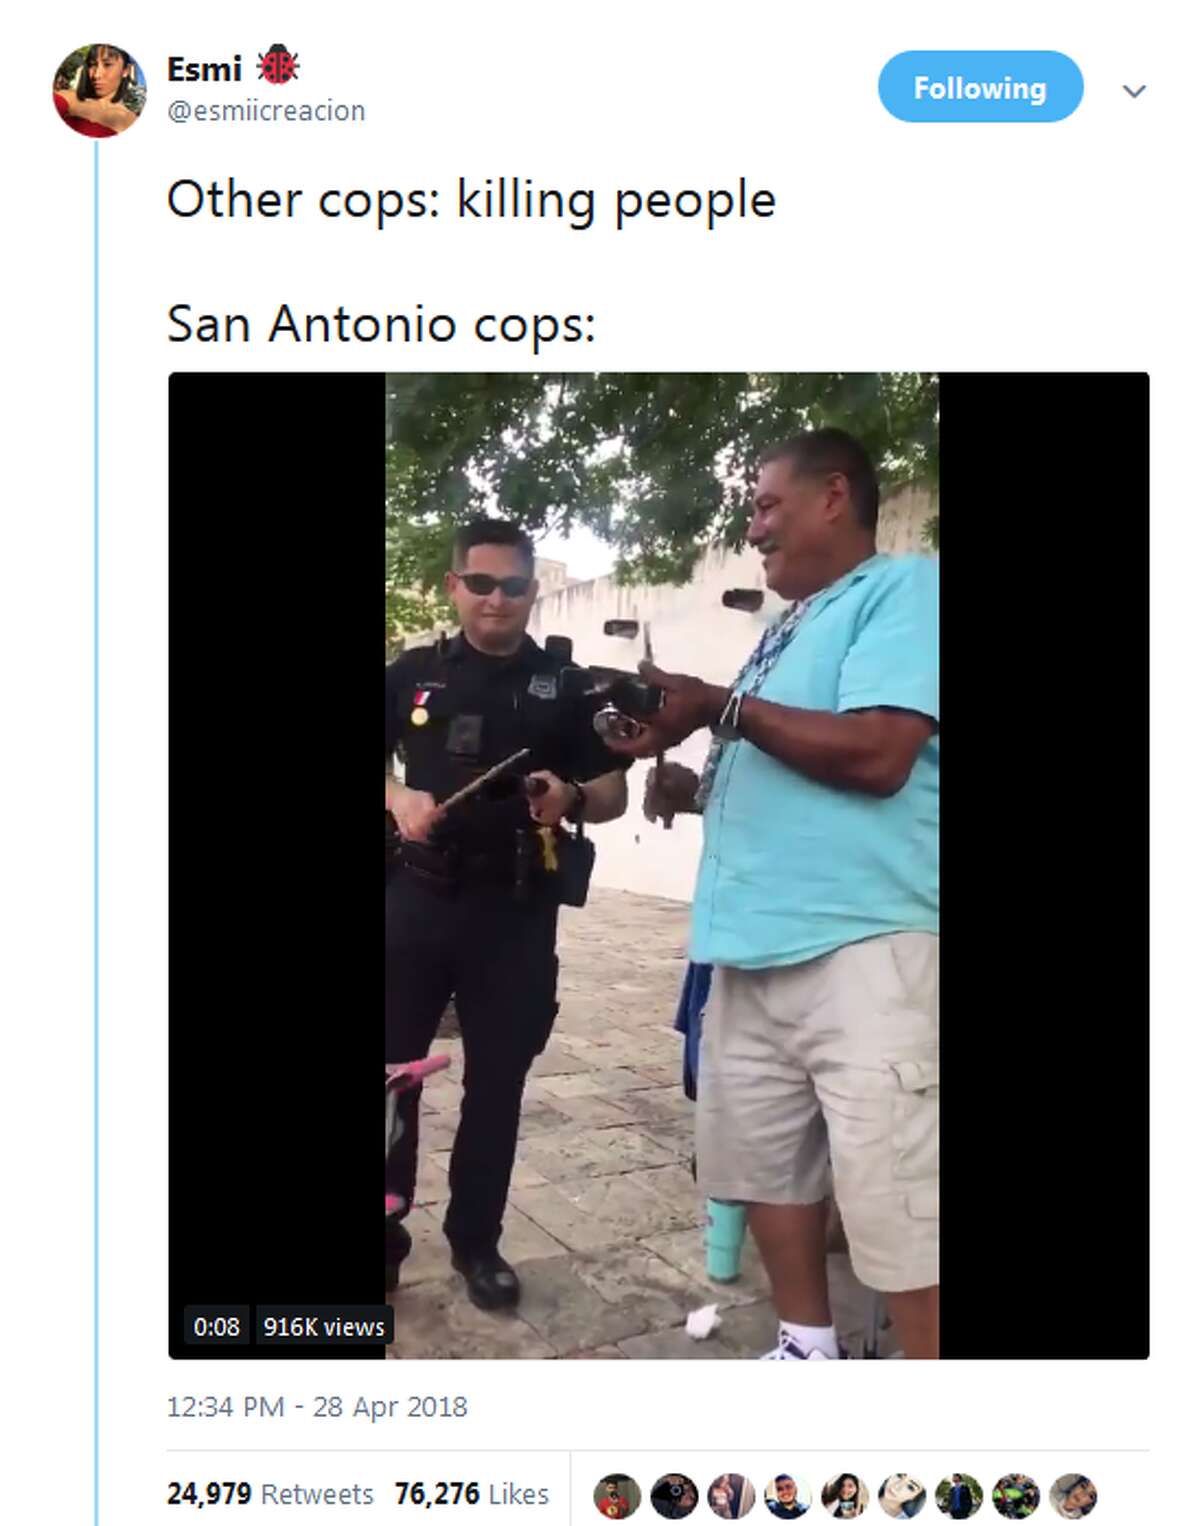 When San Antonio needed more cowbell This cop delivered. See the video here.